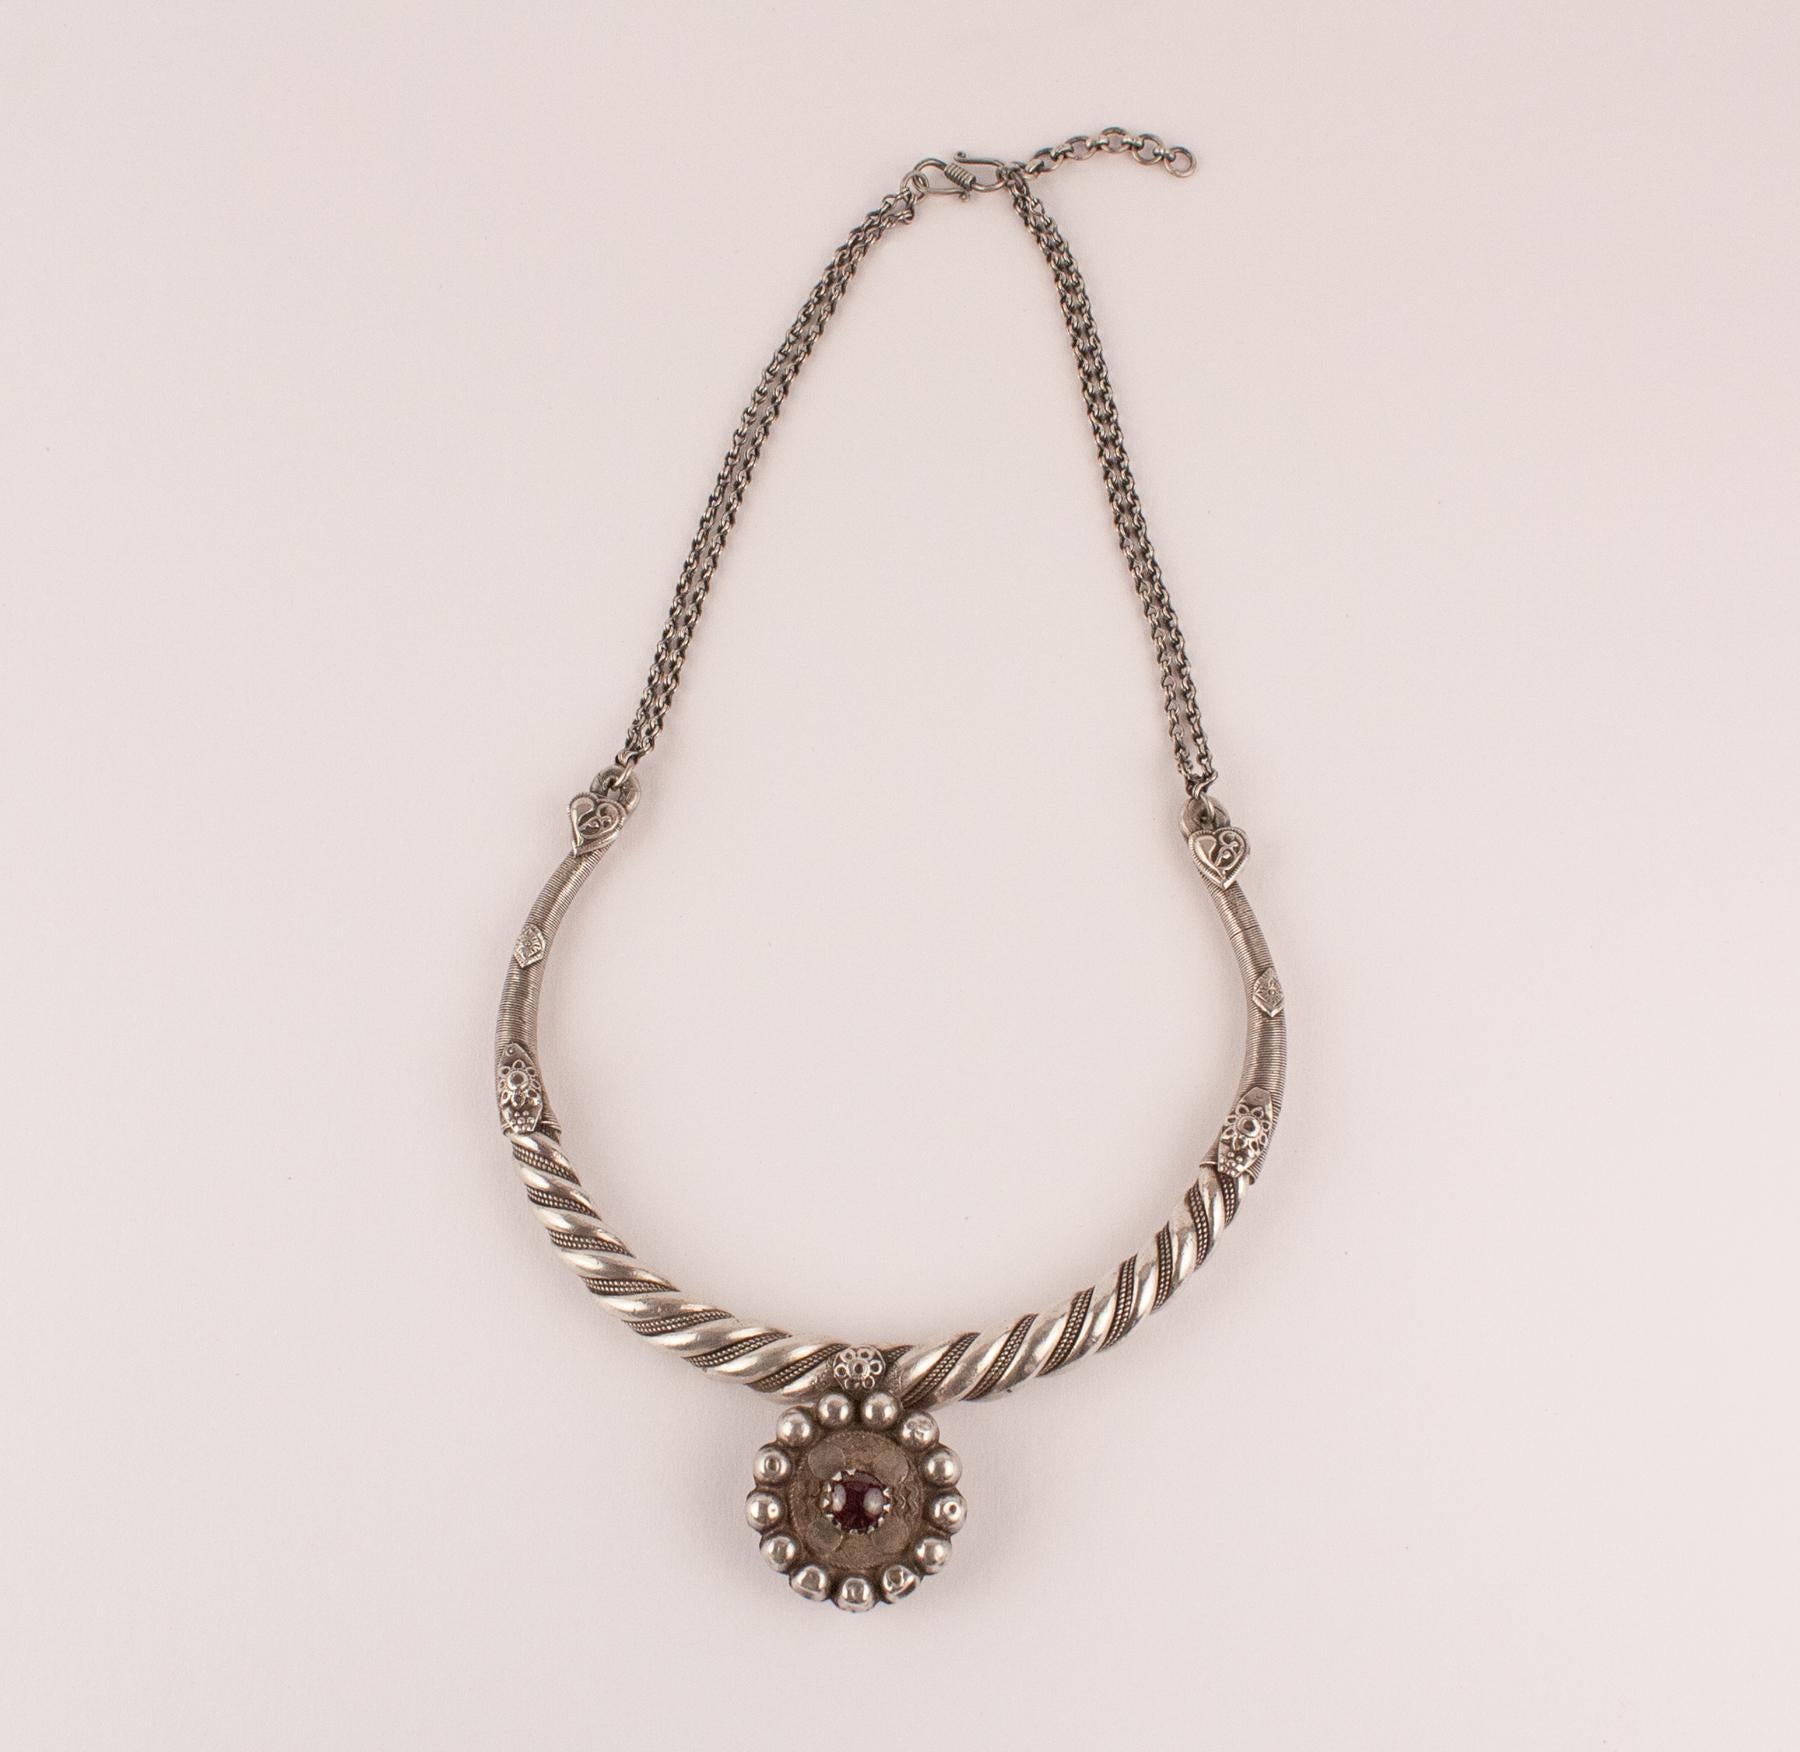 Authentic tribal Indian silver torque necklace from Rajasthan, India, circa 1950. The neckpiece is in perfect original condition and features beautiful silver hand work, a center pendant with traditional  glass bead replaced with a cabochon garnet,